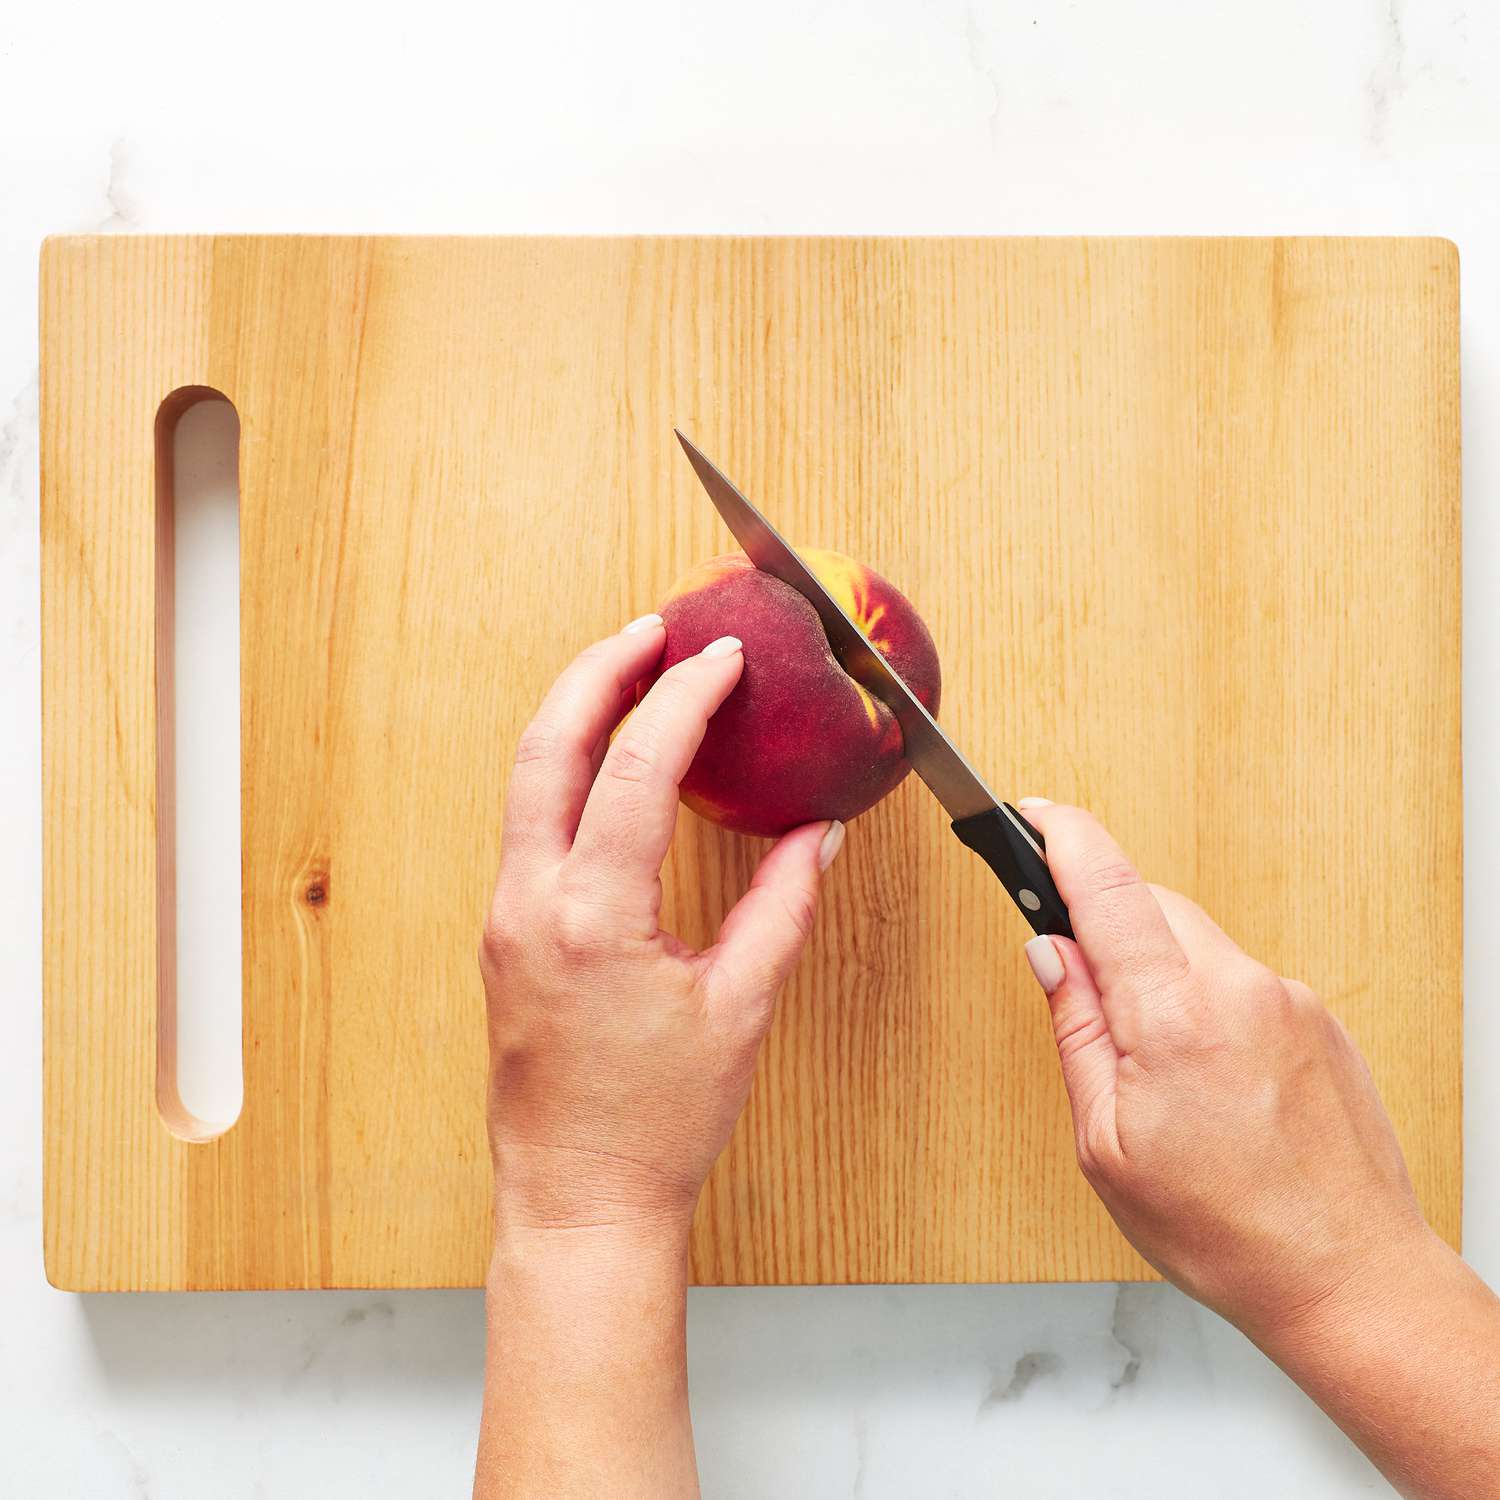 Close up on hands using a knife to cut a peach